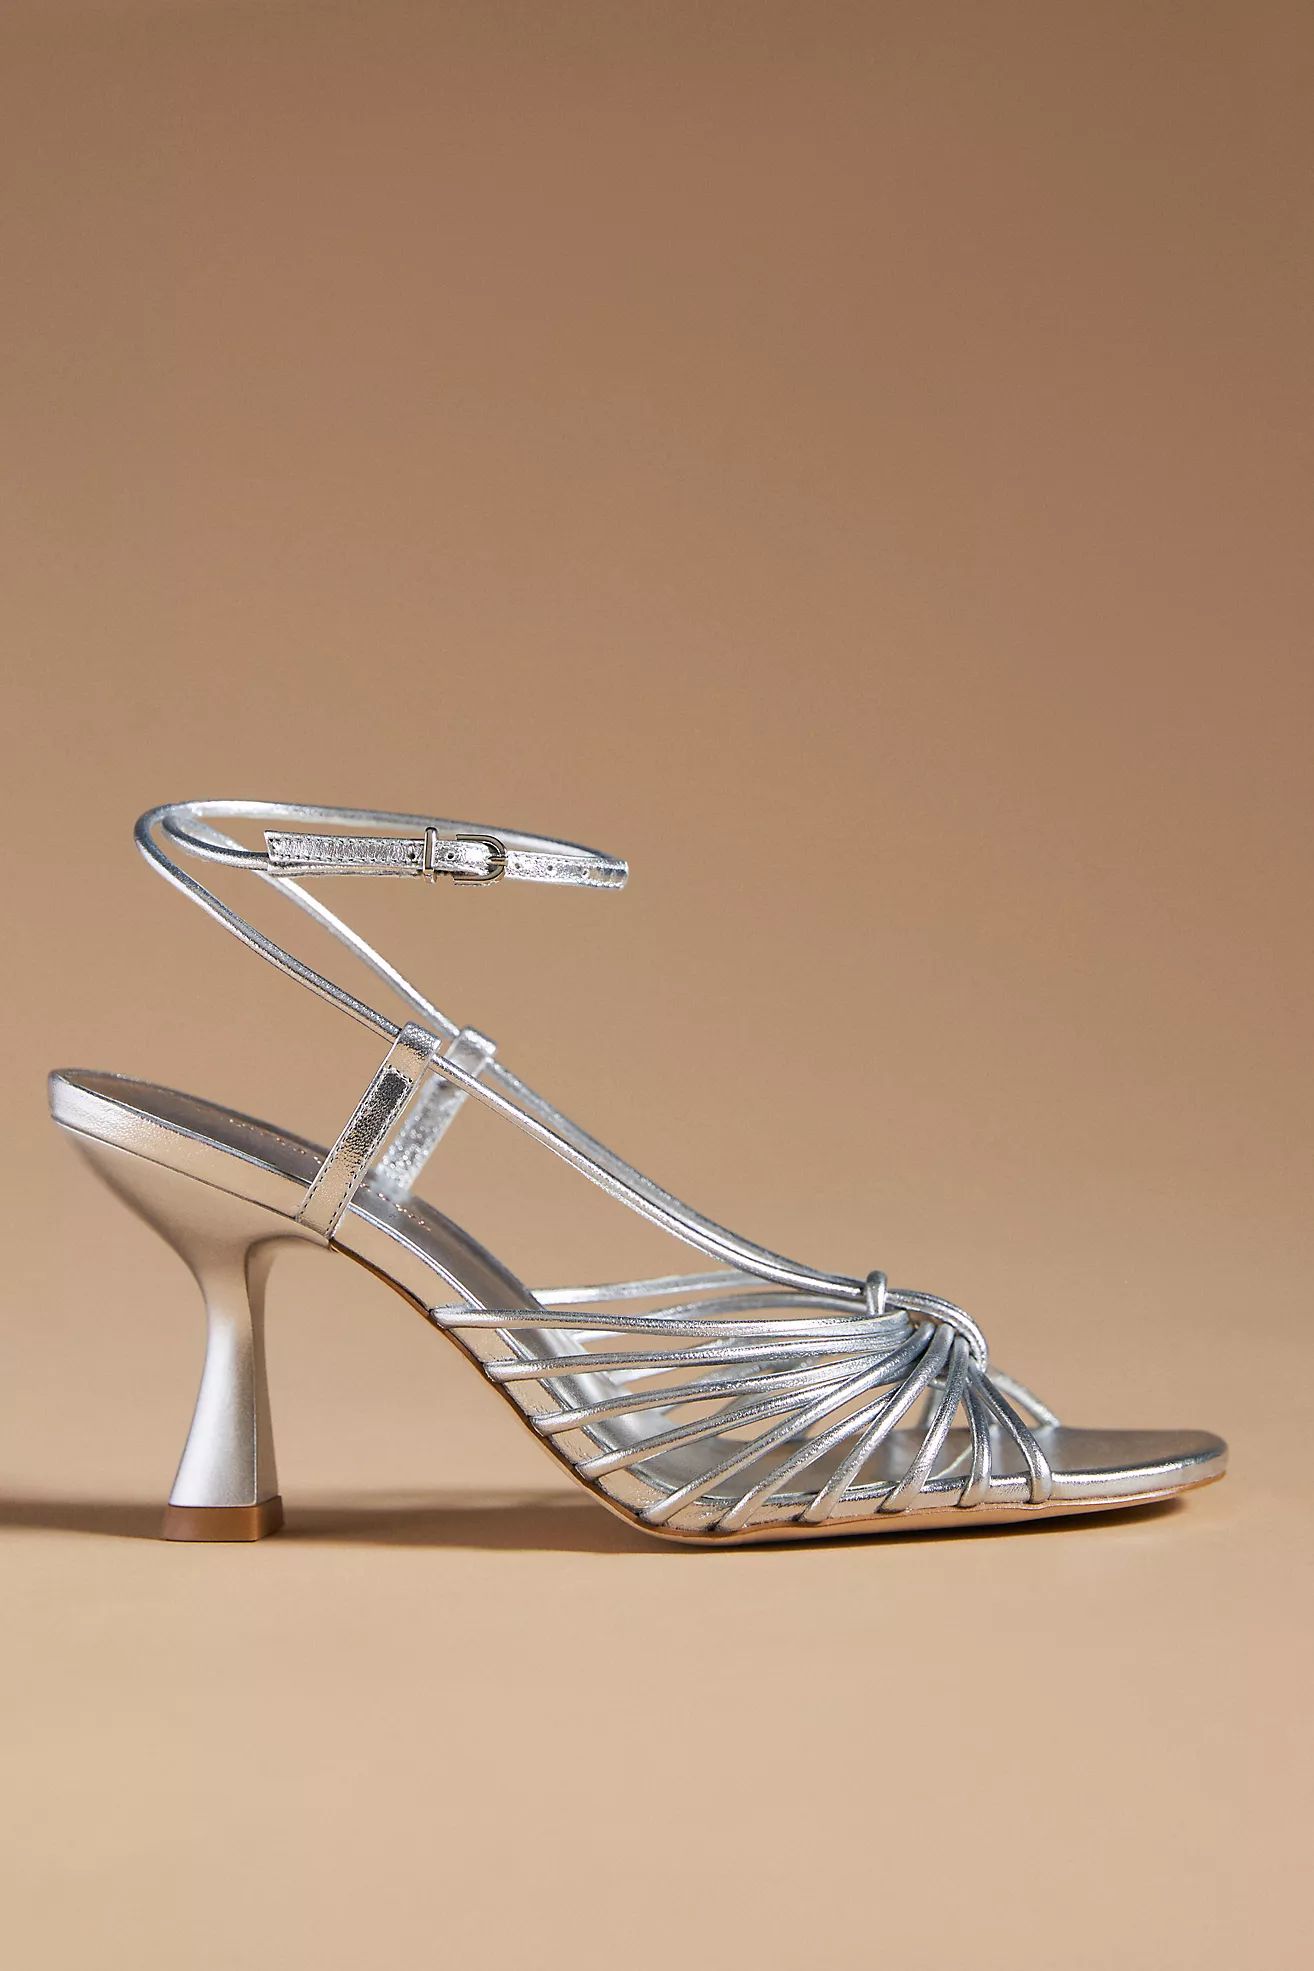 By Anthropologie Strappy Heels | Anthropologie (US)